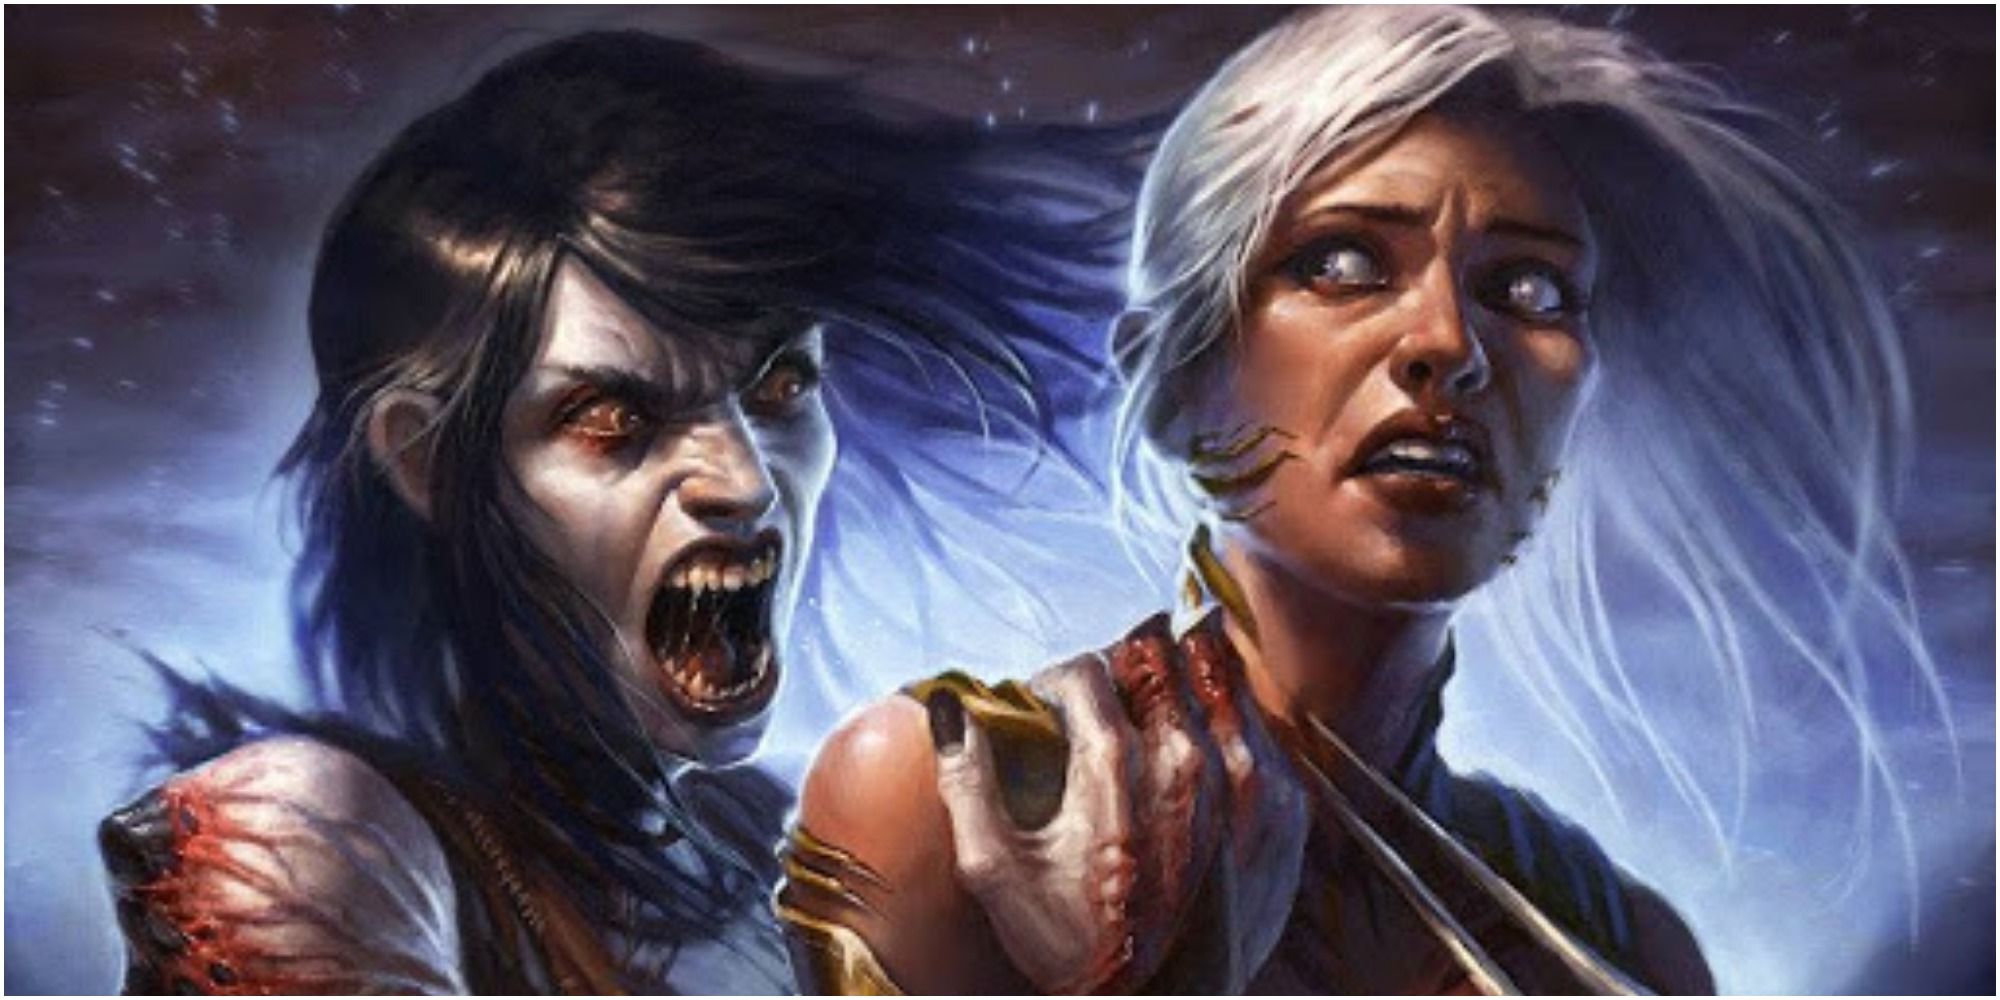 Magic The Gathering Go For The Throat card art